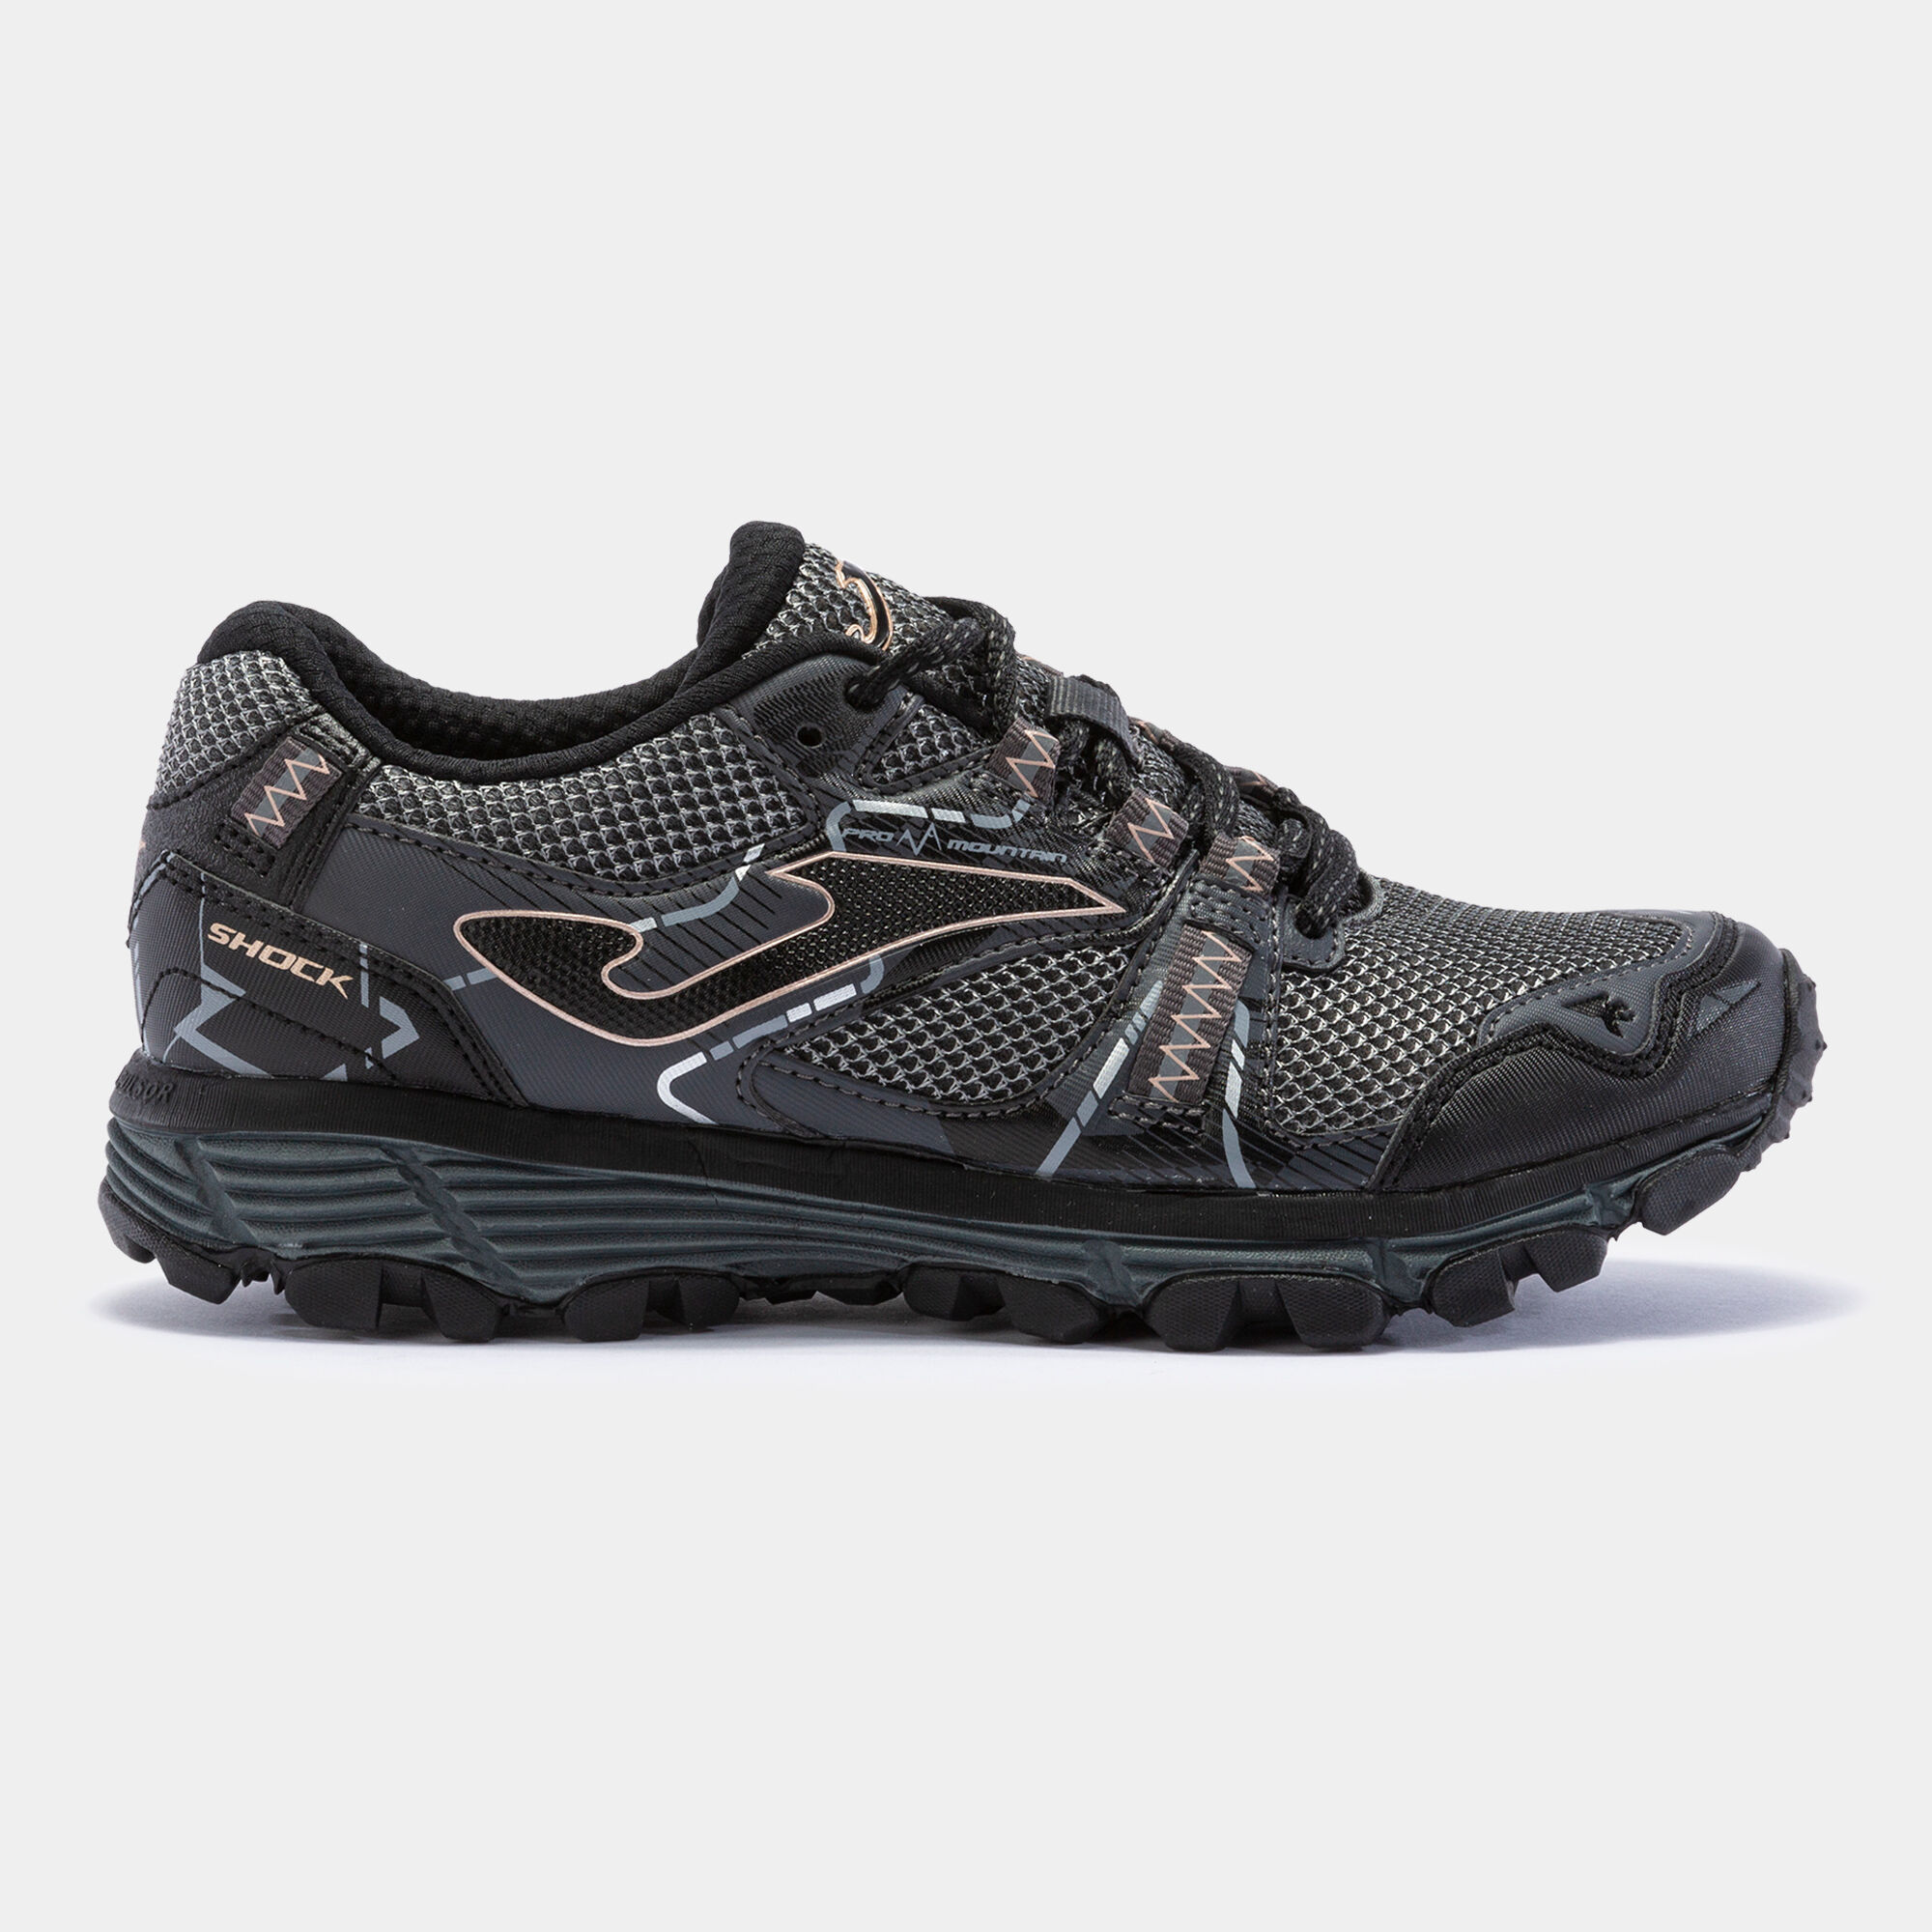 Chaussures trail running Tk.Shock Lady 23 femme gris